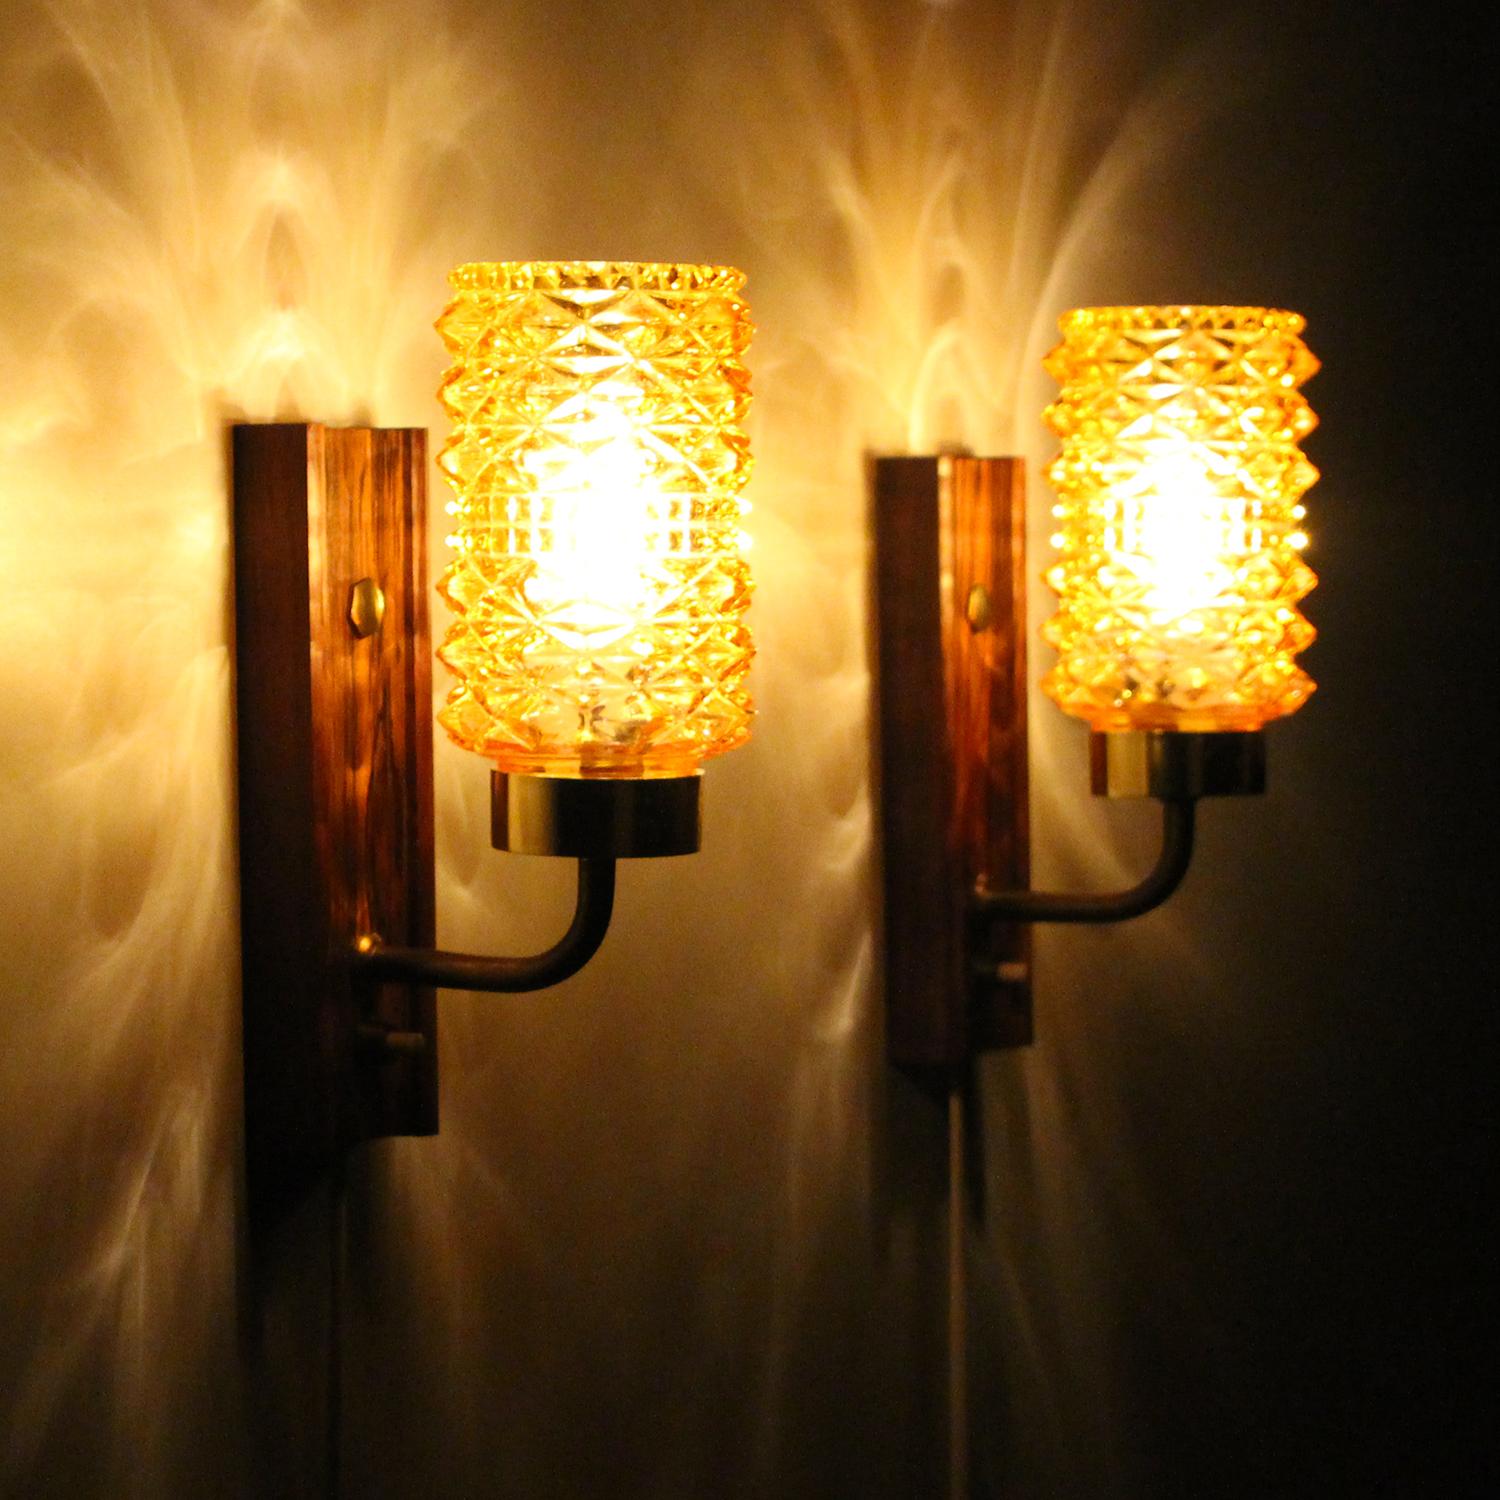 Amber & Rosewood wall lamps - 1950s Danish vintage wall lights by Danish producer Stil-lampet, all in good vintage condition.

A charming pair of midcentury sconces, each comprised of a thick cylindrical pressed glass shade, a brass lacquered